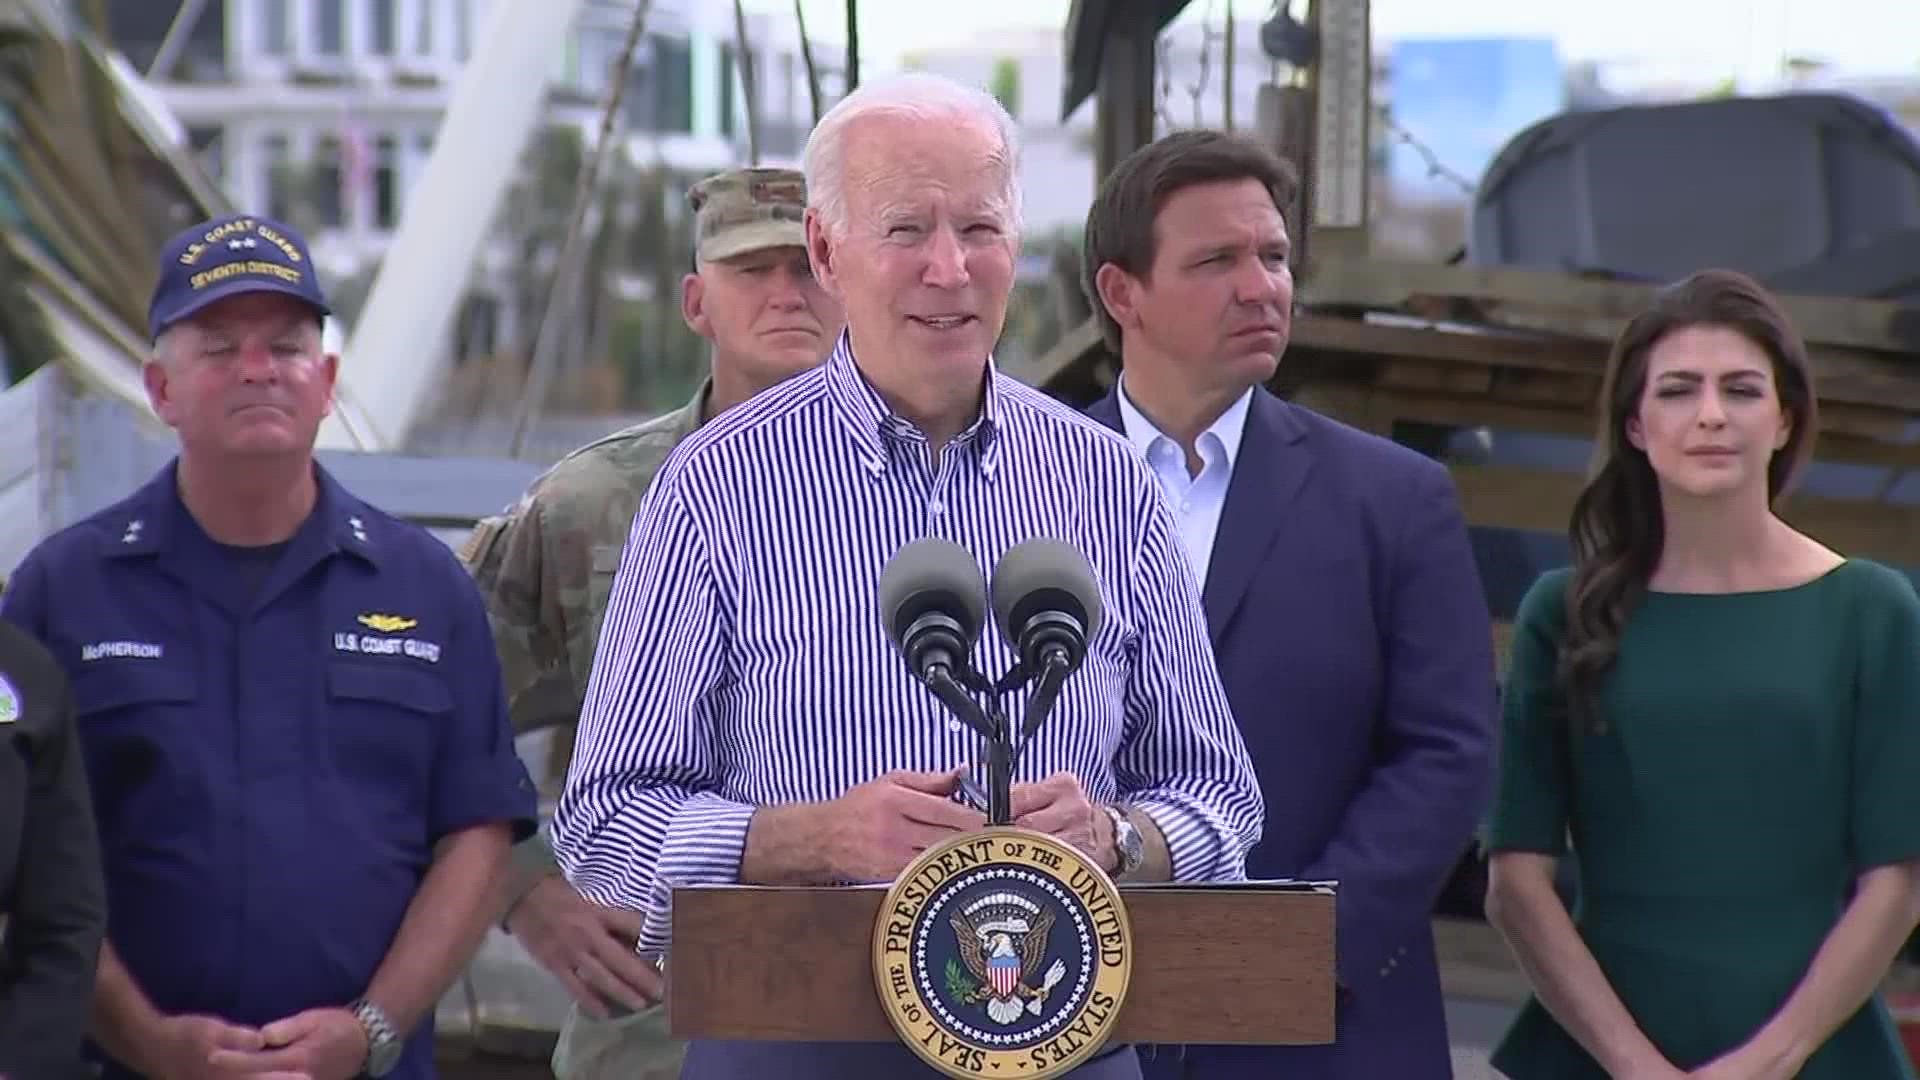 President Joe Biden toured hurricane-ravaged areas of Florida on Wednesday, surveying storm damage by helicopter and encouraging local residents on foot.